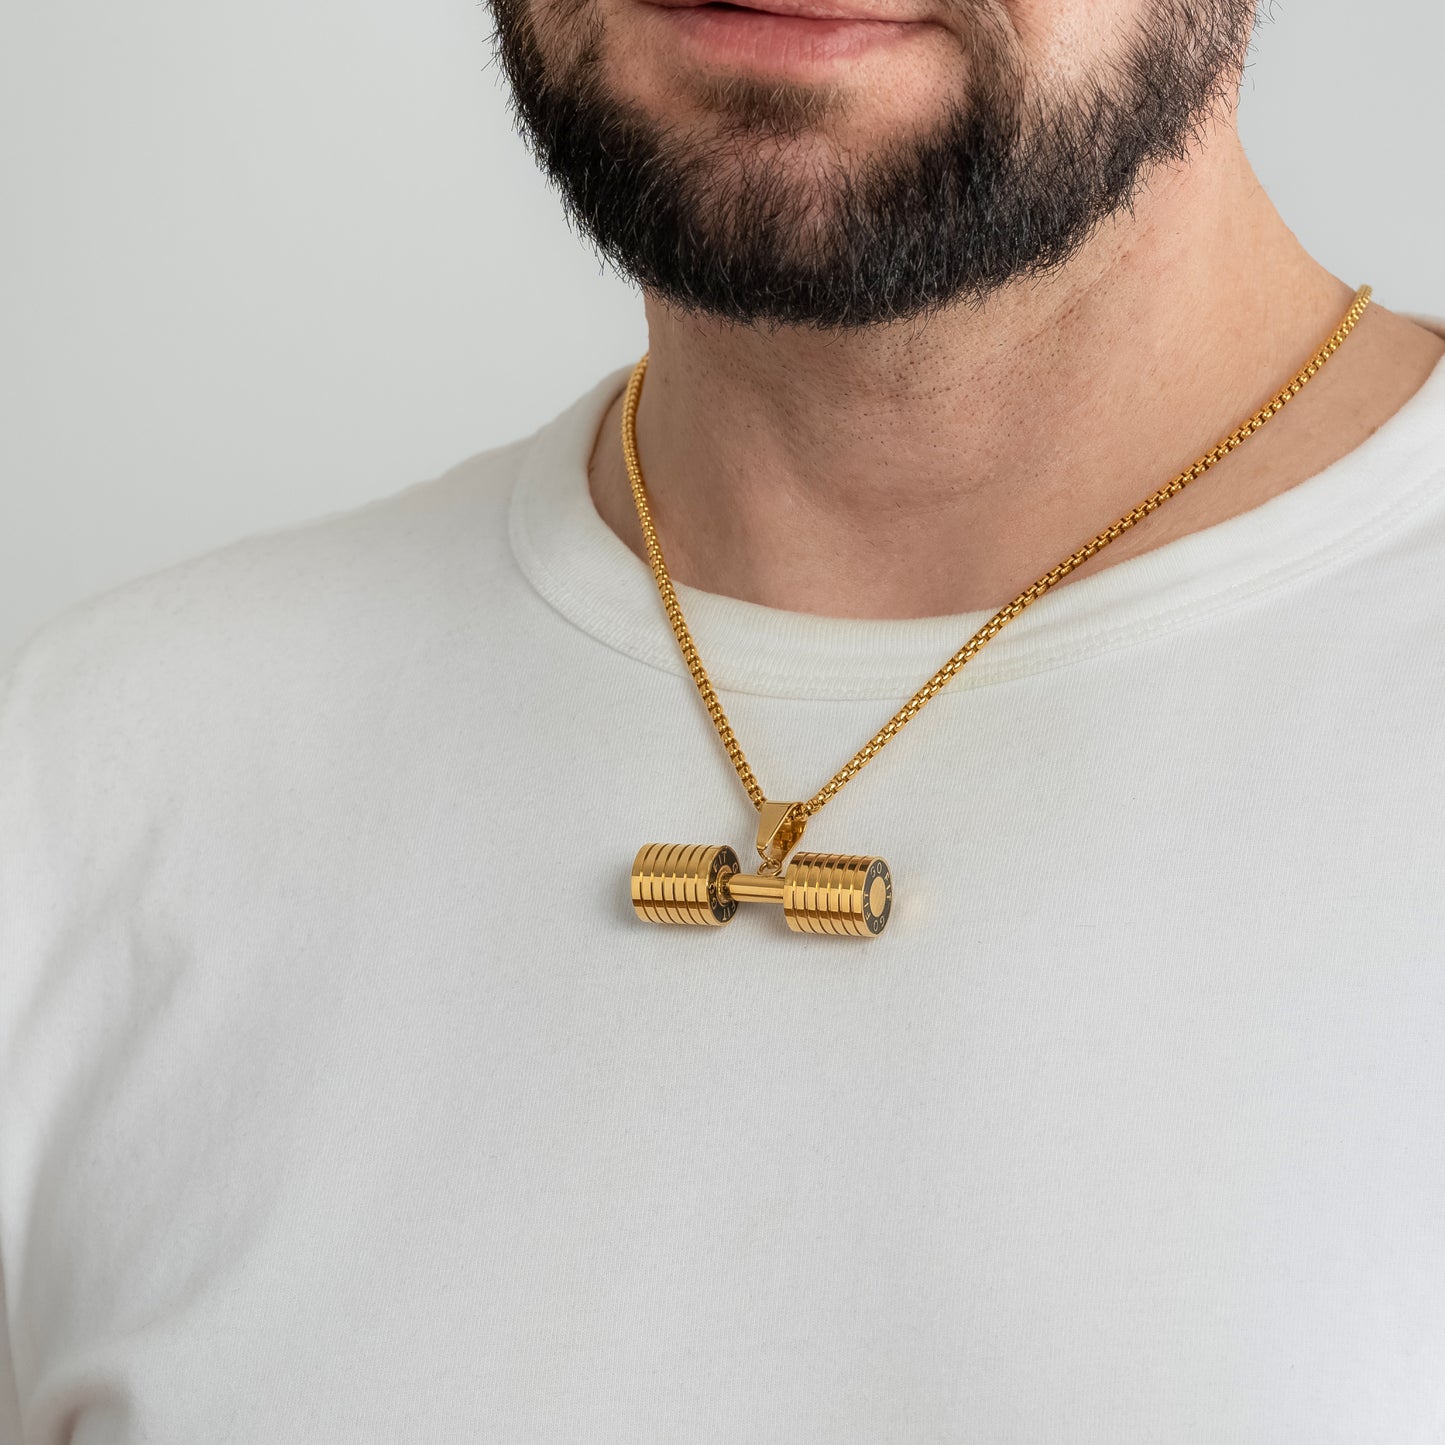 A male model in a white t-shirt wearing a Dumbbell Fitness Gold Pendant with a 3mm Round Box link Gold chain 22 inches. Close-up image of the tarnish-free, sweatproof and waterproof motivational men's necklace.